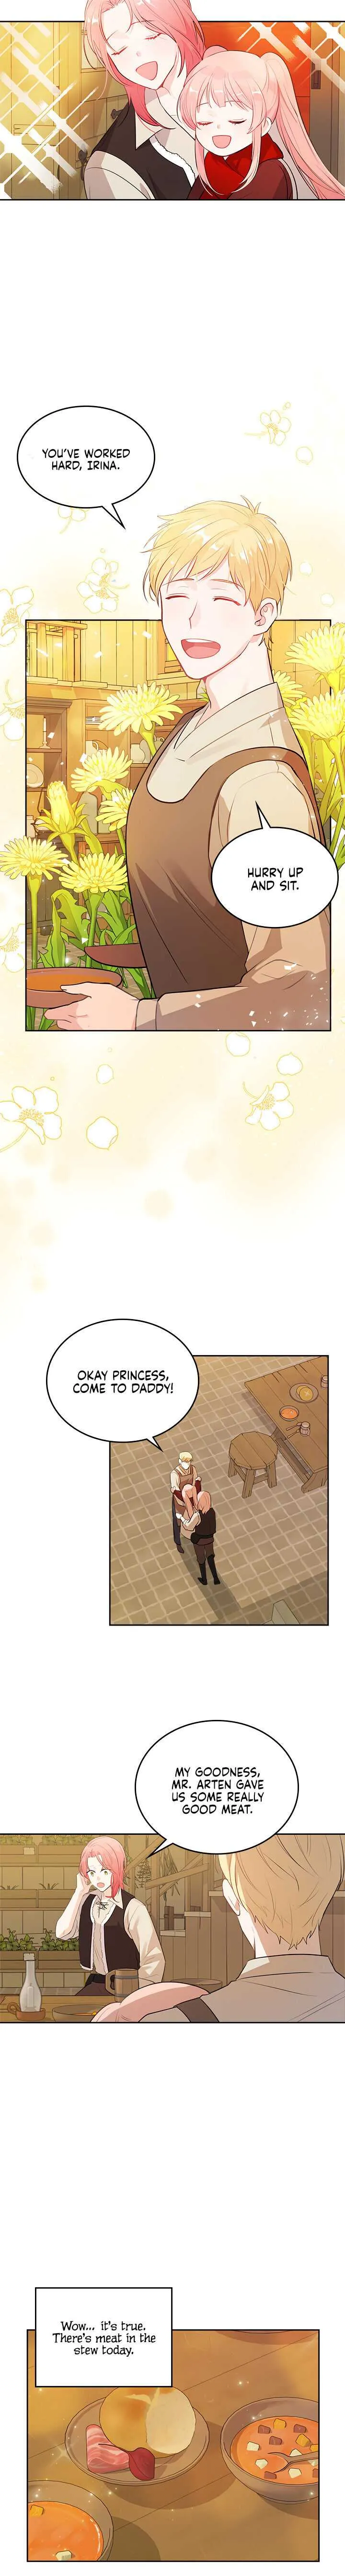 The Villainous Princess Wants To Live In A Gingerbread House Chapter 1 page 9